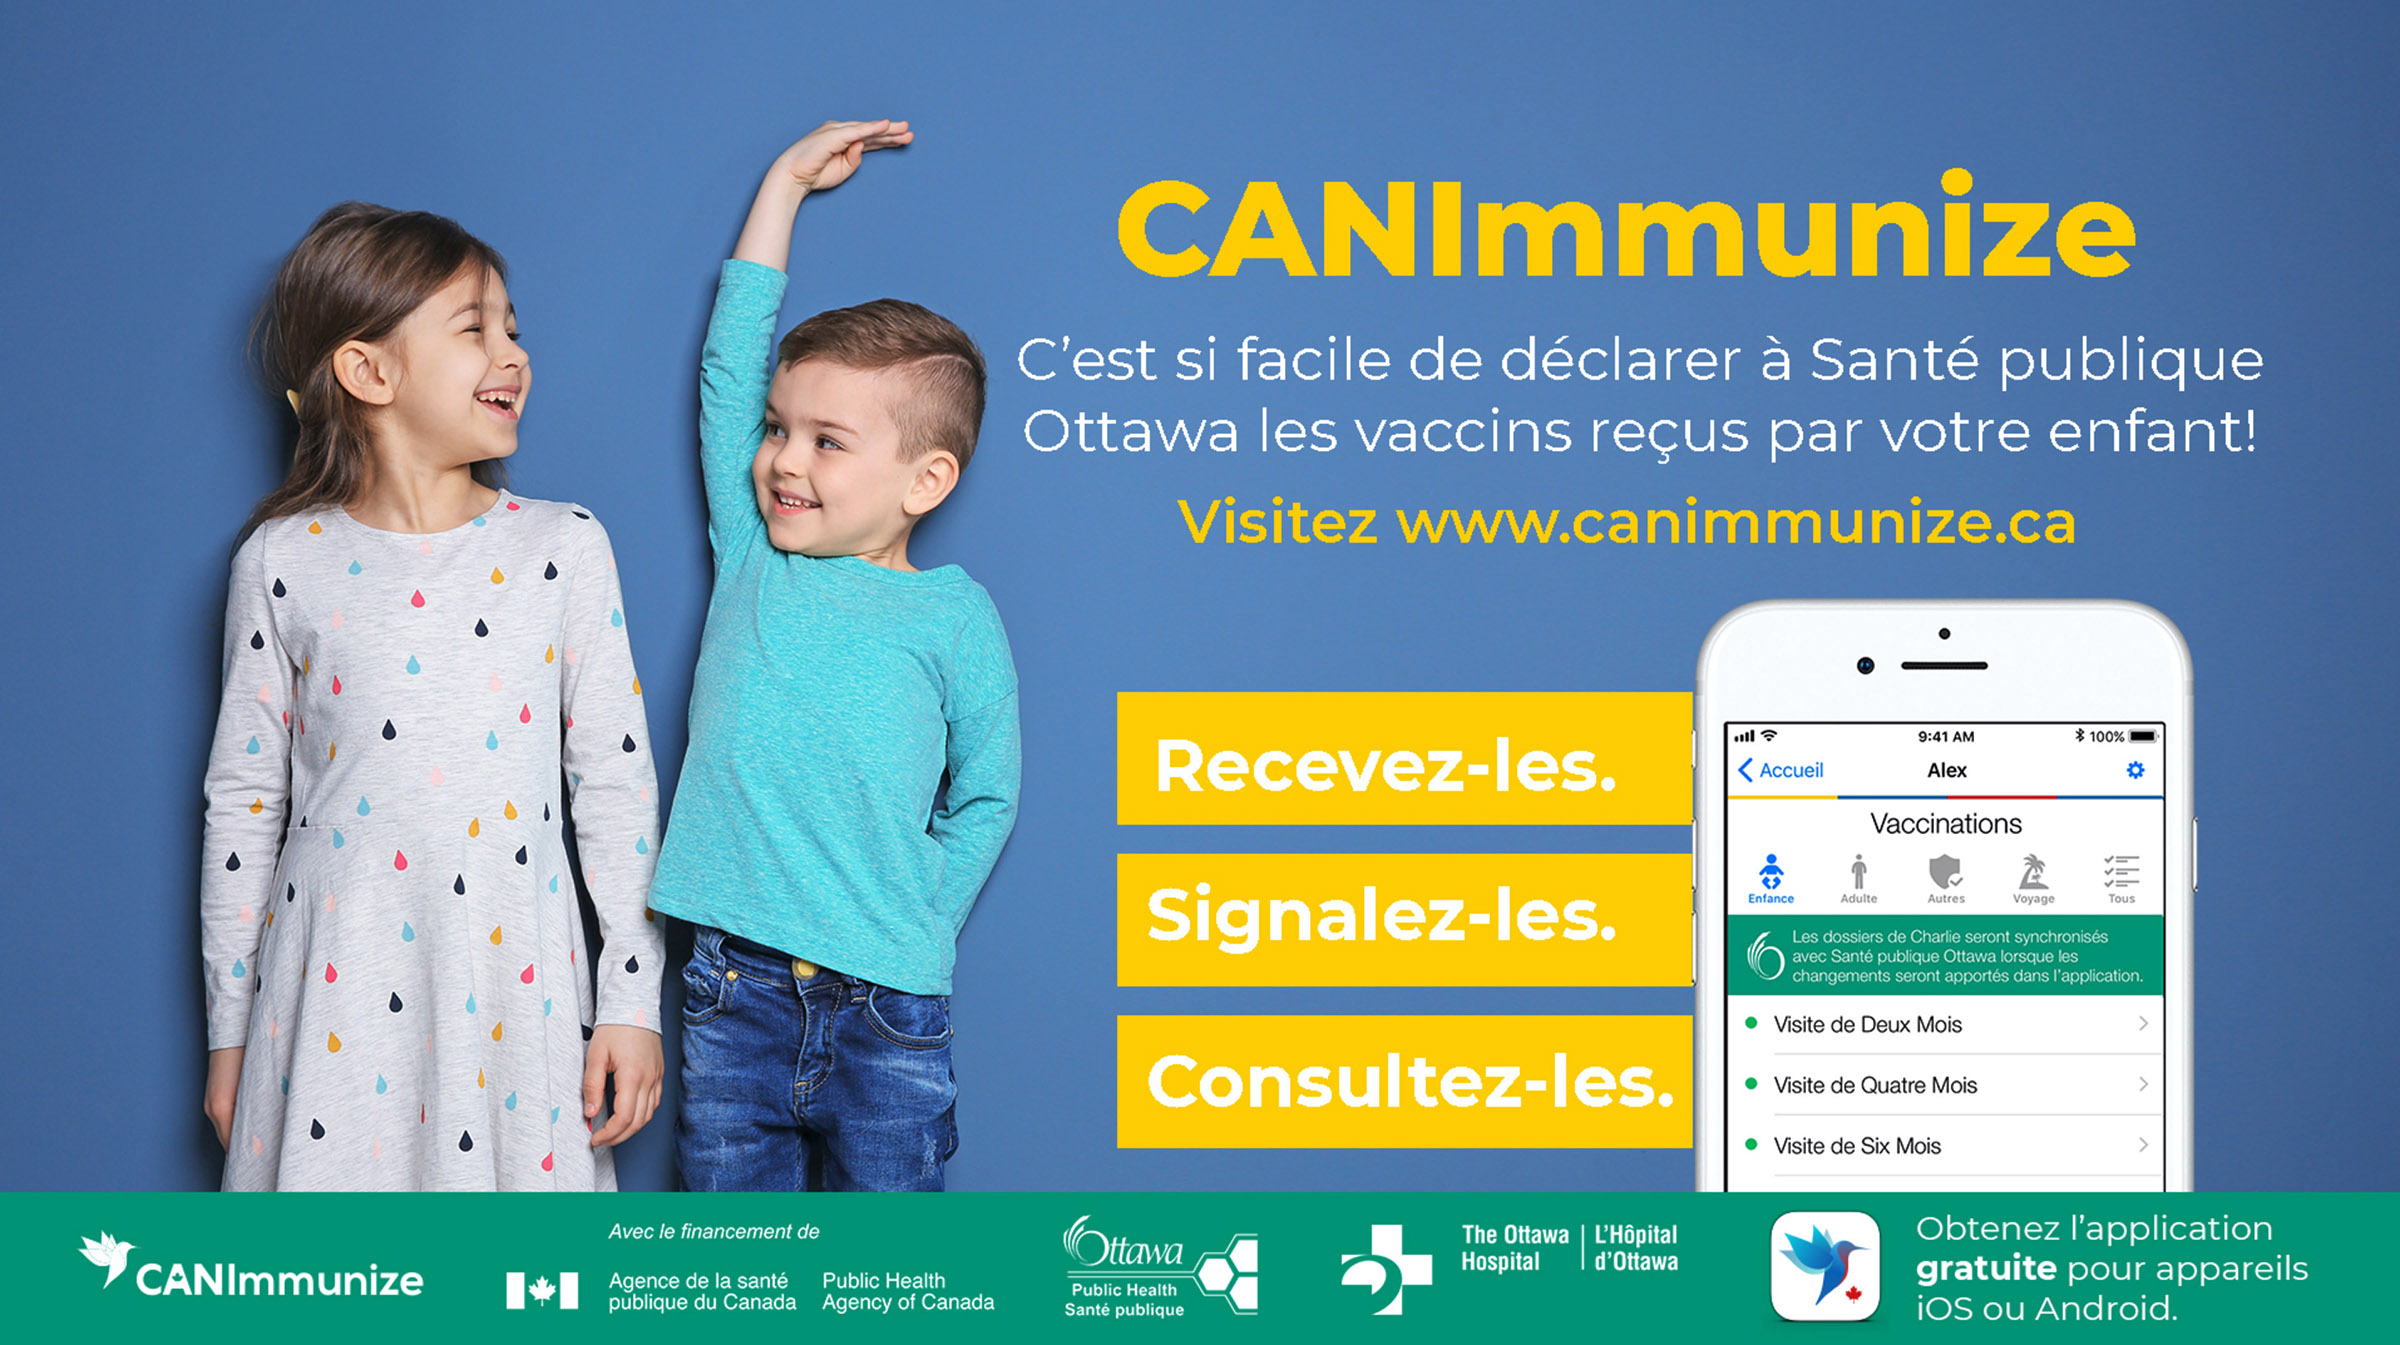 TV graphic featuring the CANImmunize app and two children smiling.